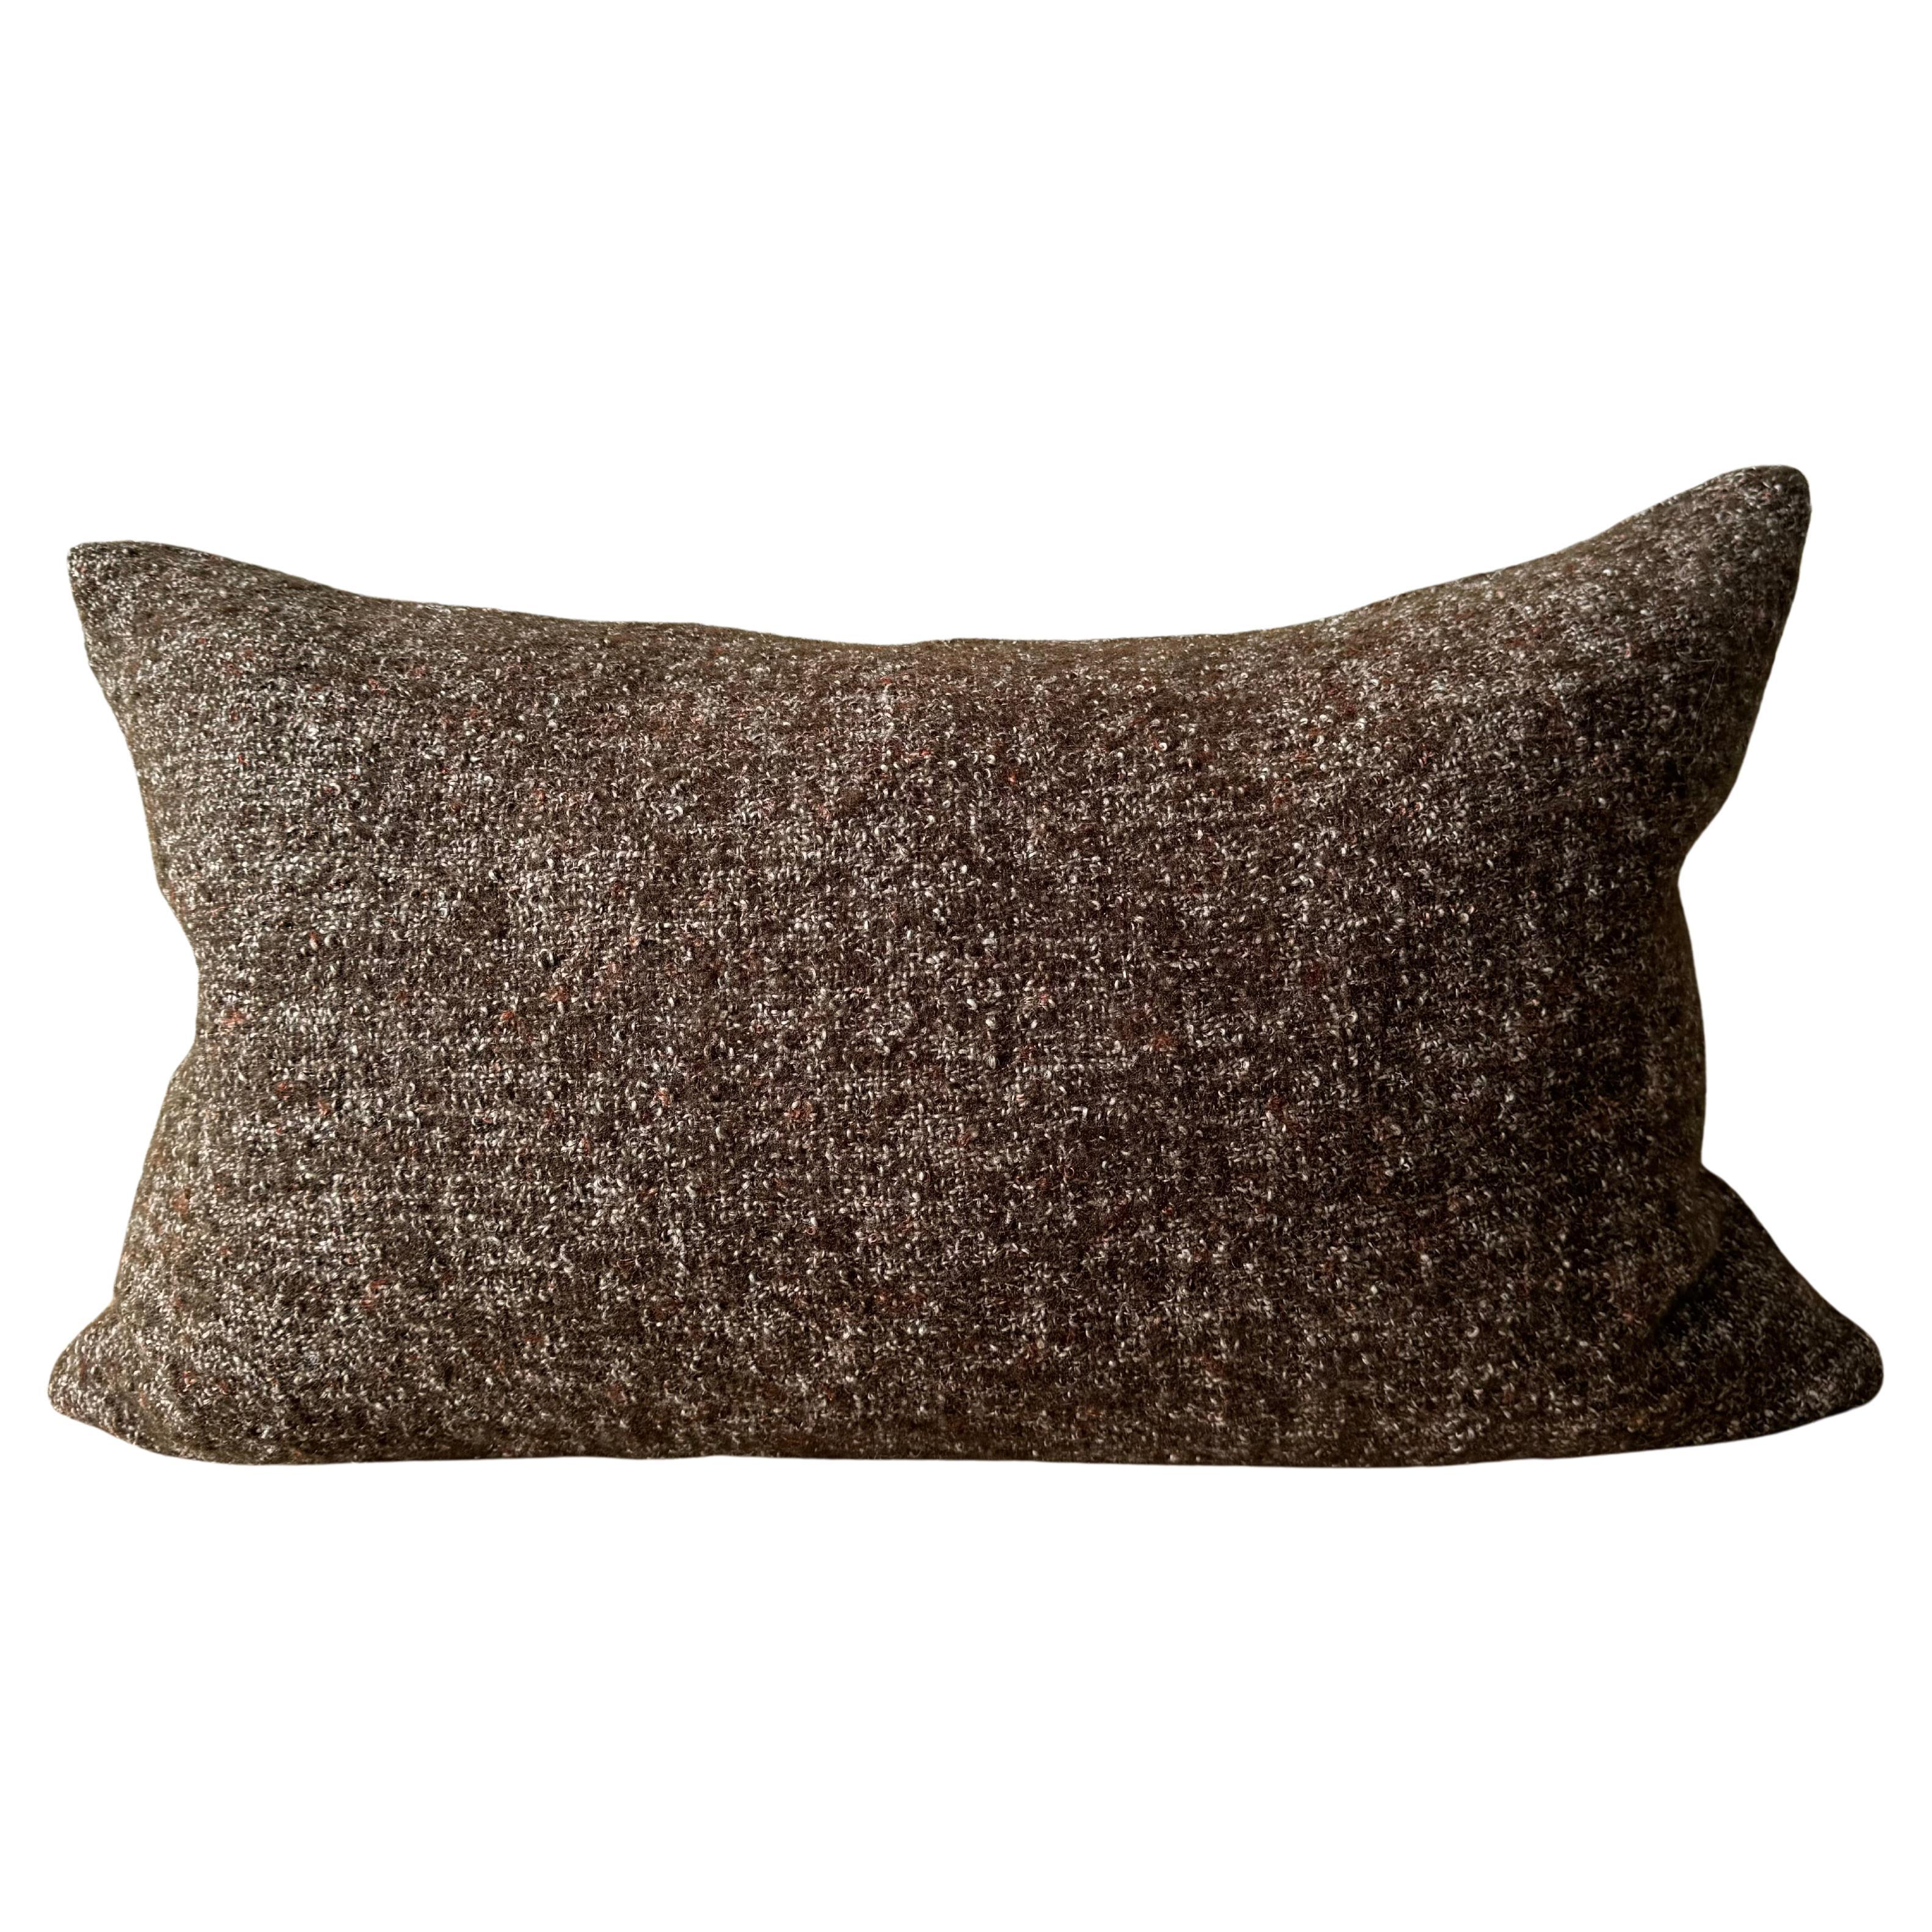 Custom Linen and Wool Lumbar Pillow in Coco with Down Feather Insert For Sale